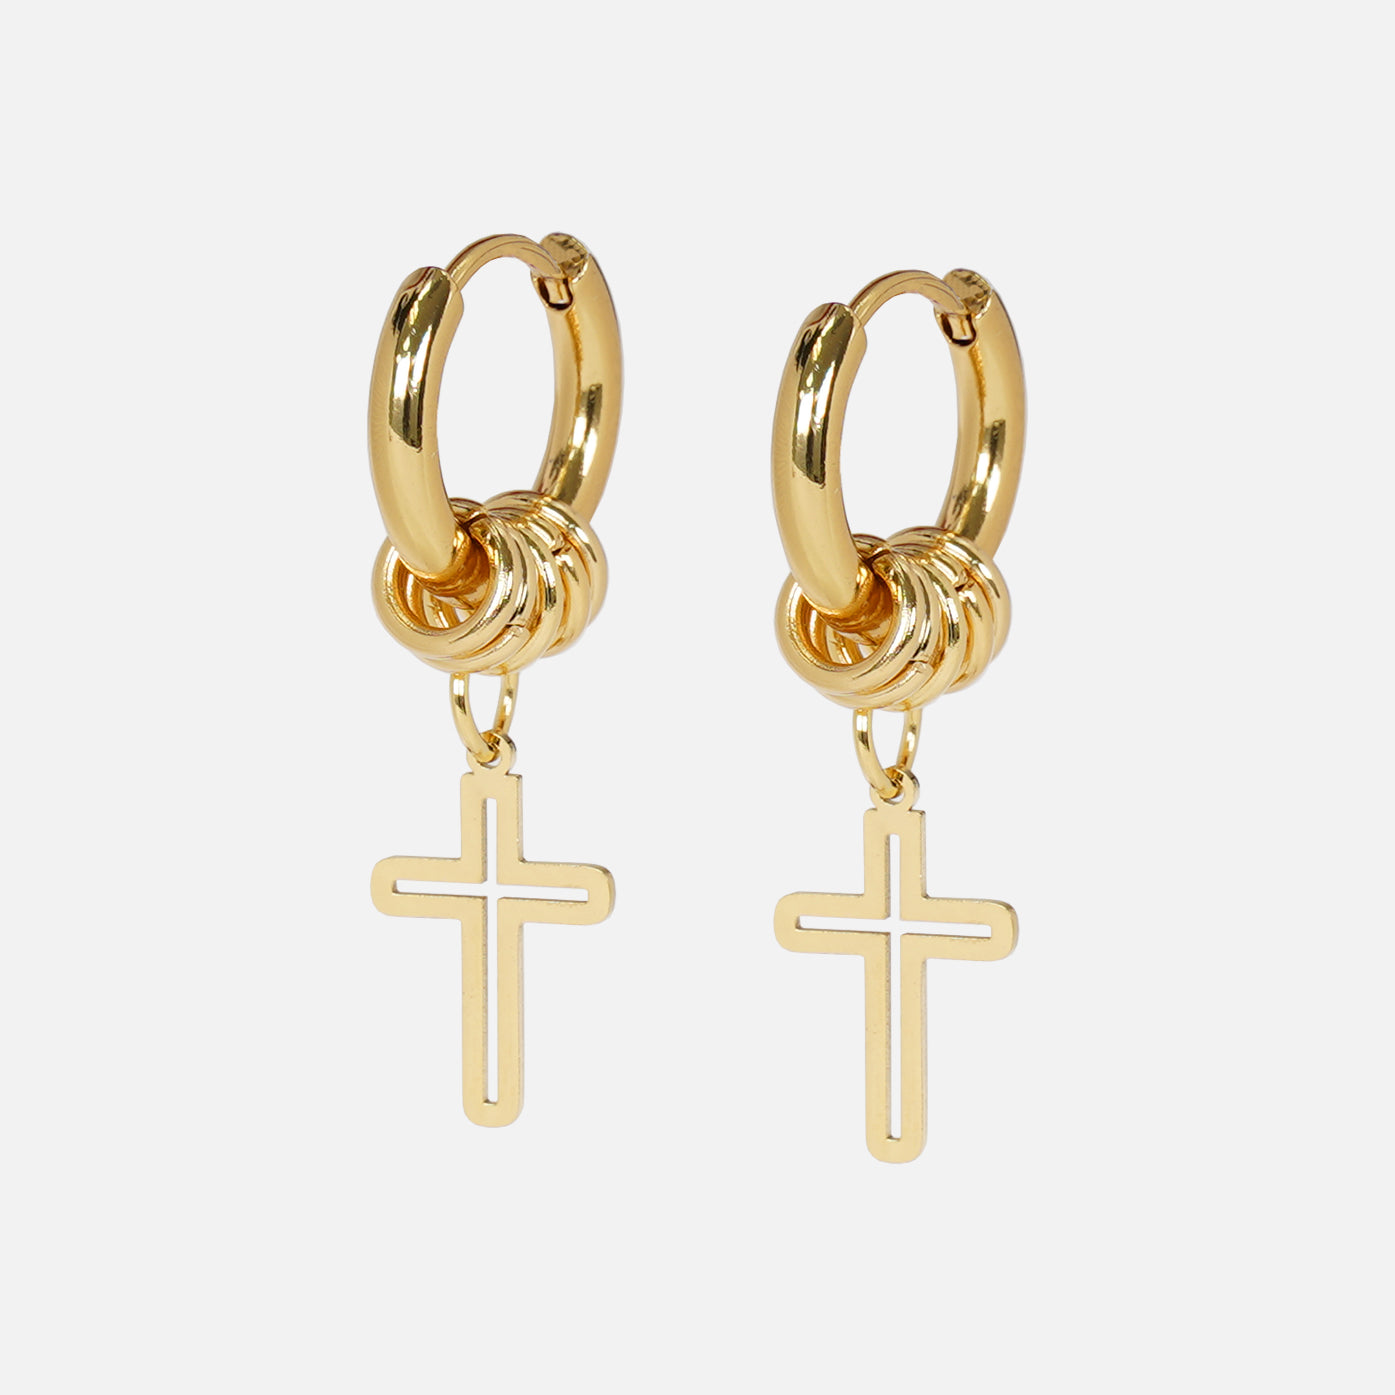 4 Hoops Carved Cross Earring - Gold Plated Stainless Steel